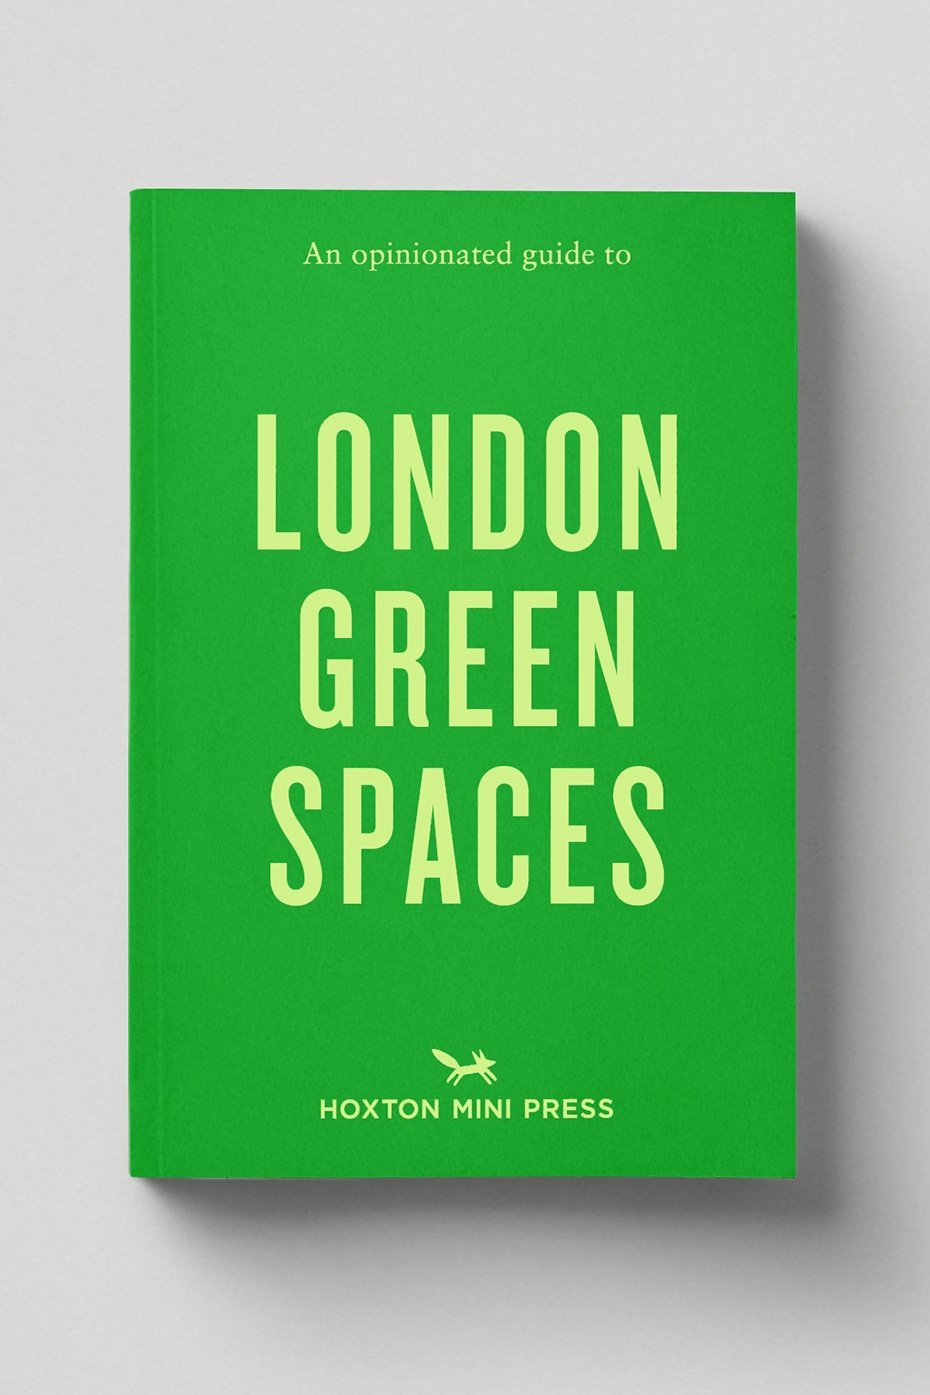 Hoxton Mini Press HOXTON MINI PRESS AN OPINIONATED GUIDE TO LONDON GREEN SPACES BOOK